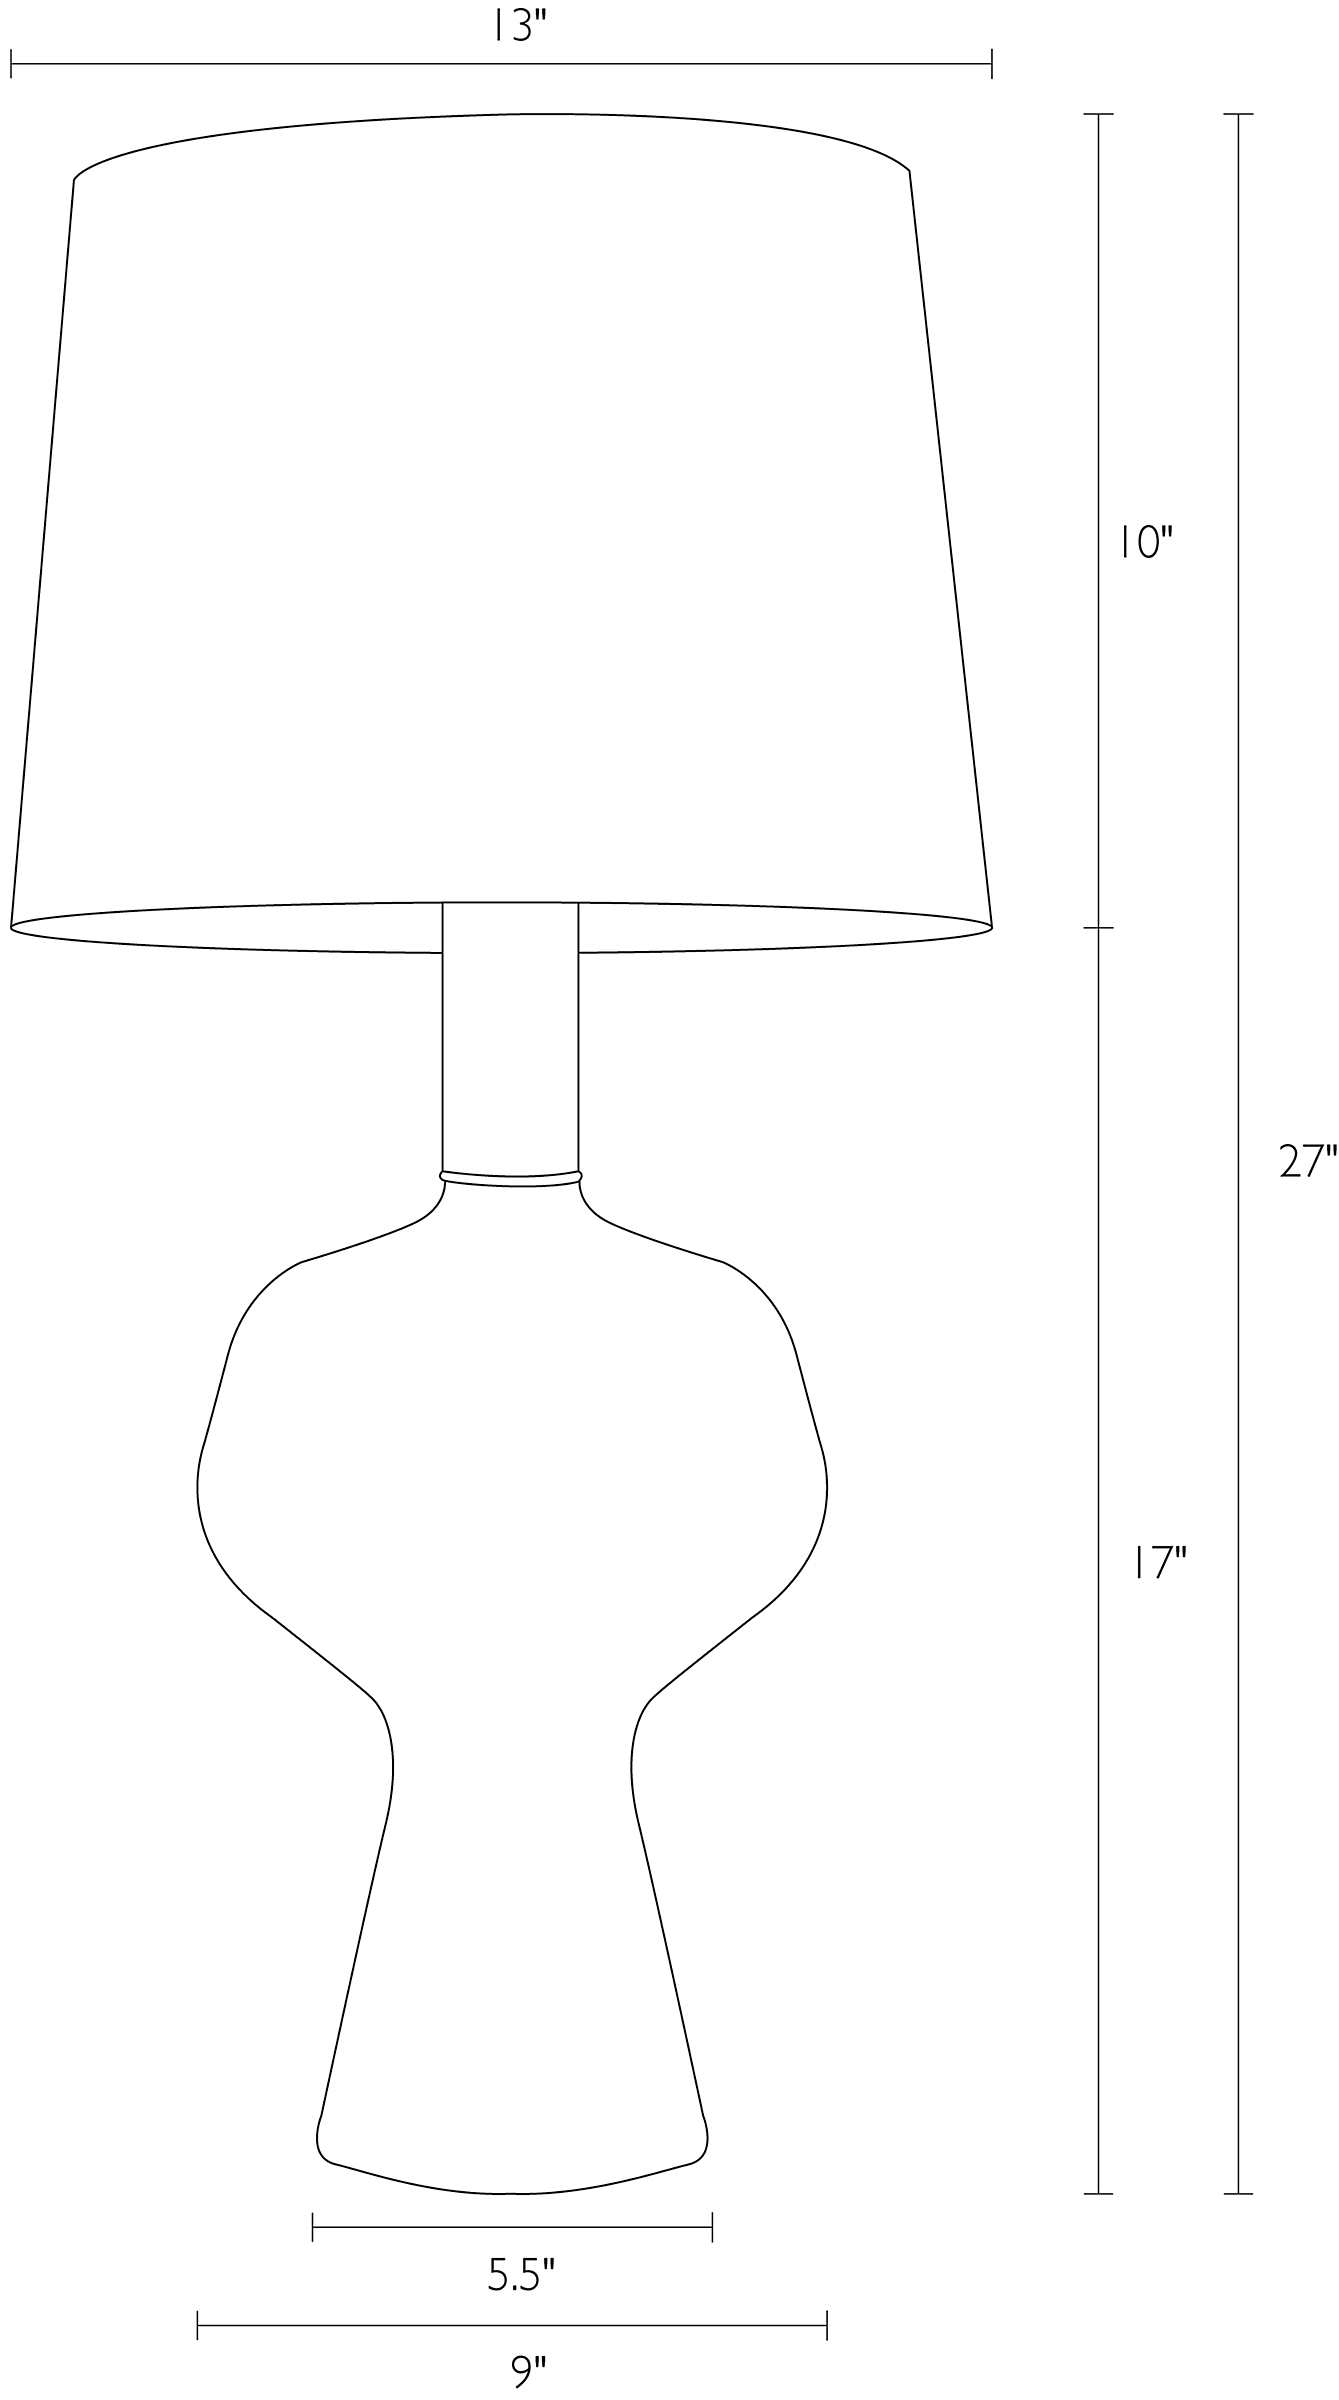 Detail of Althea table lamp dimension drawing.